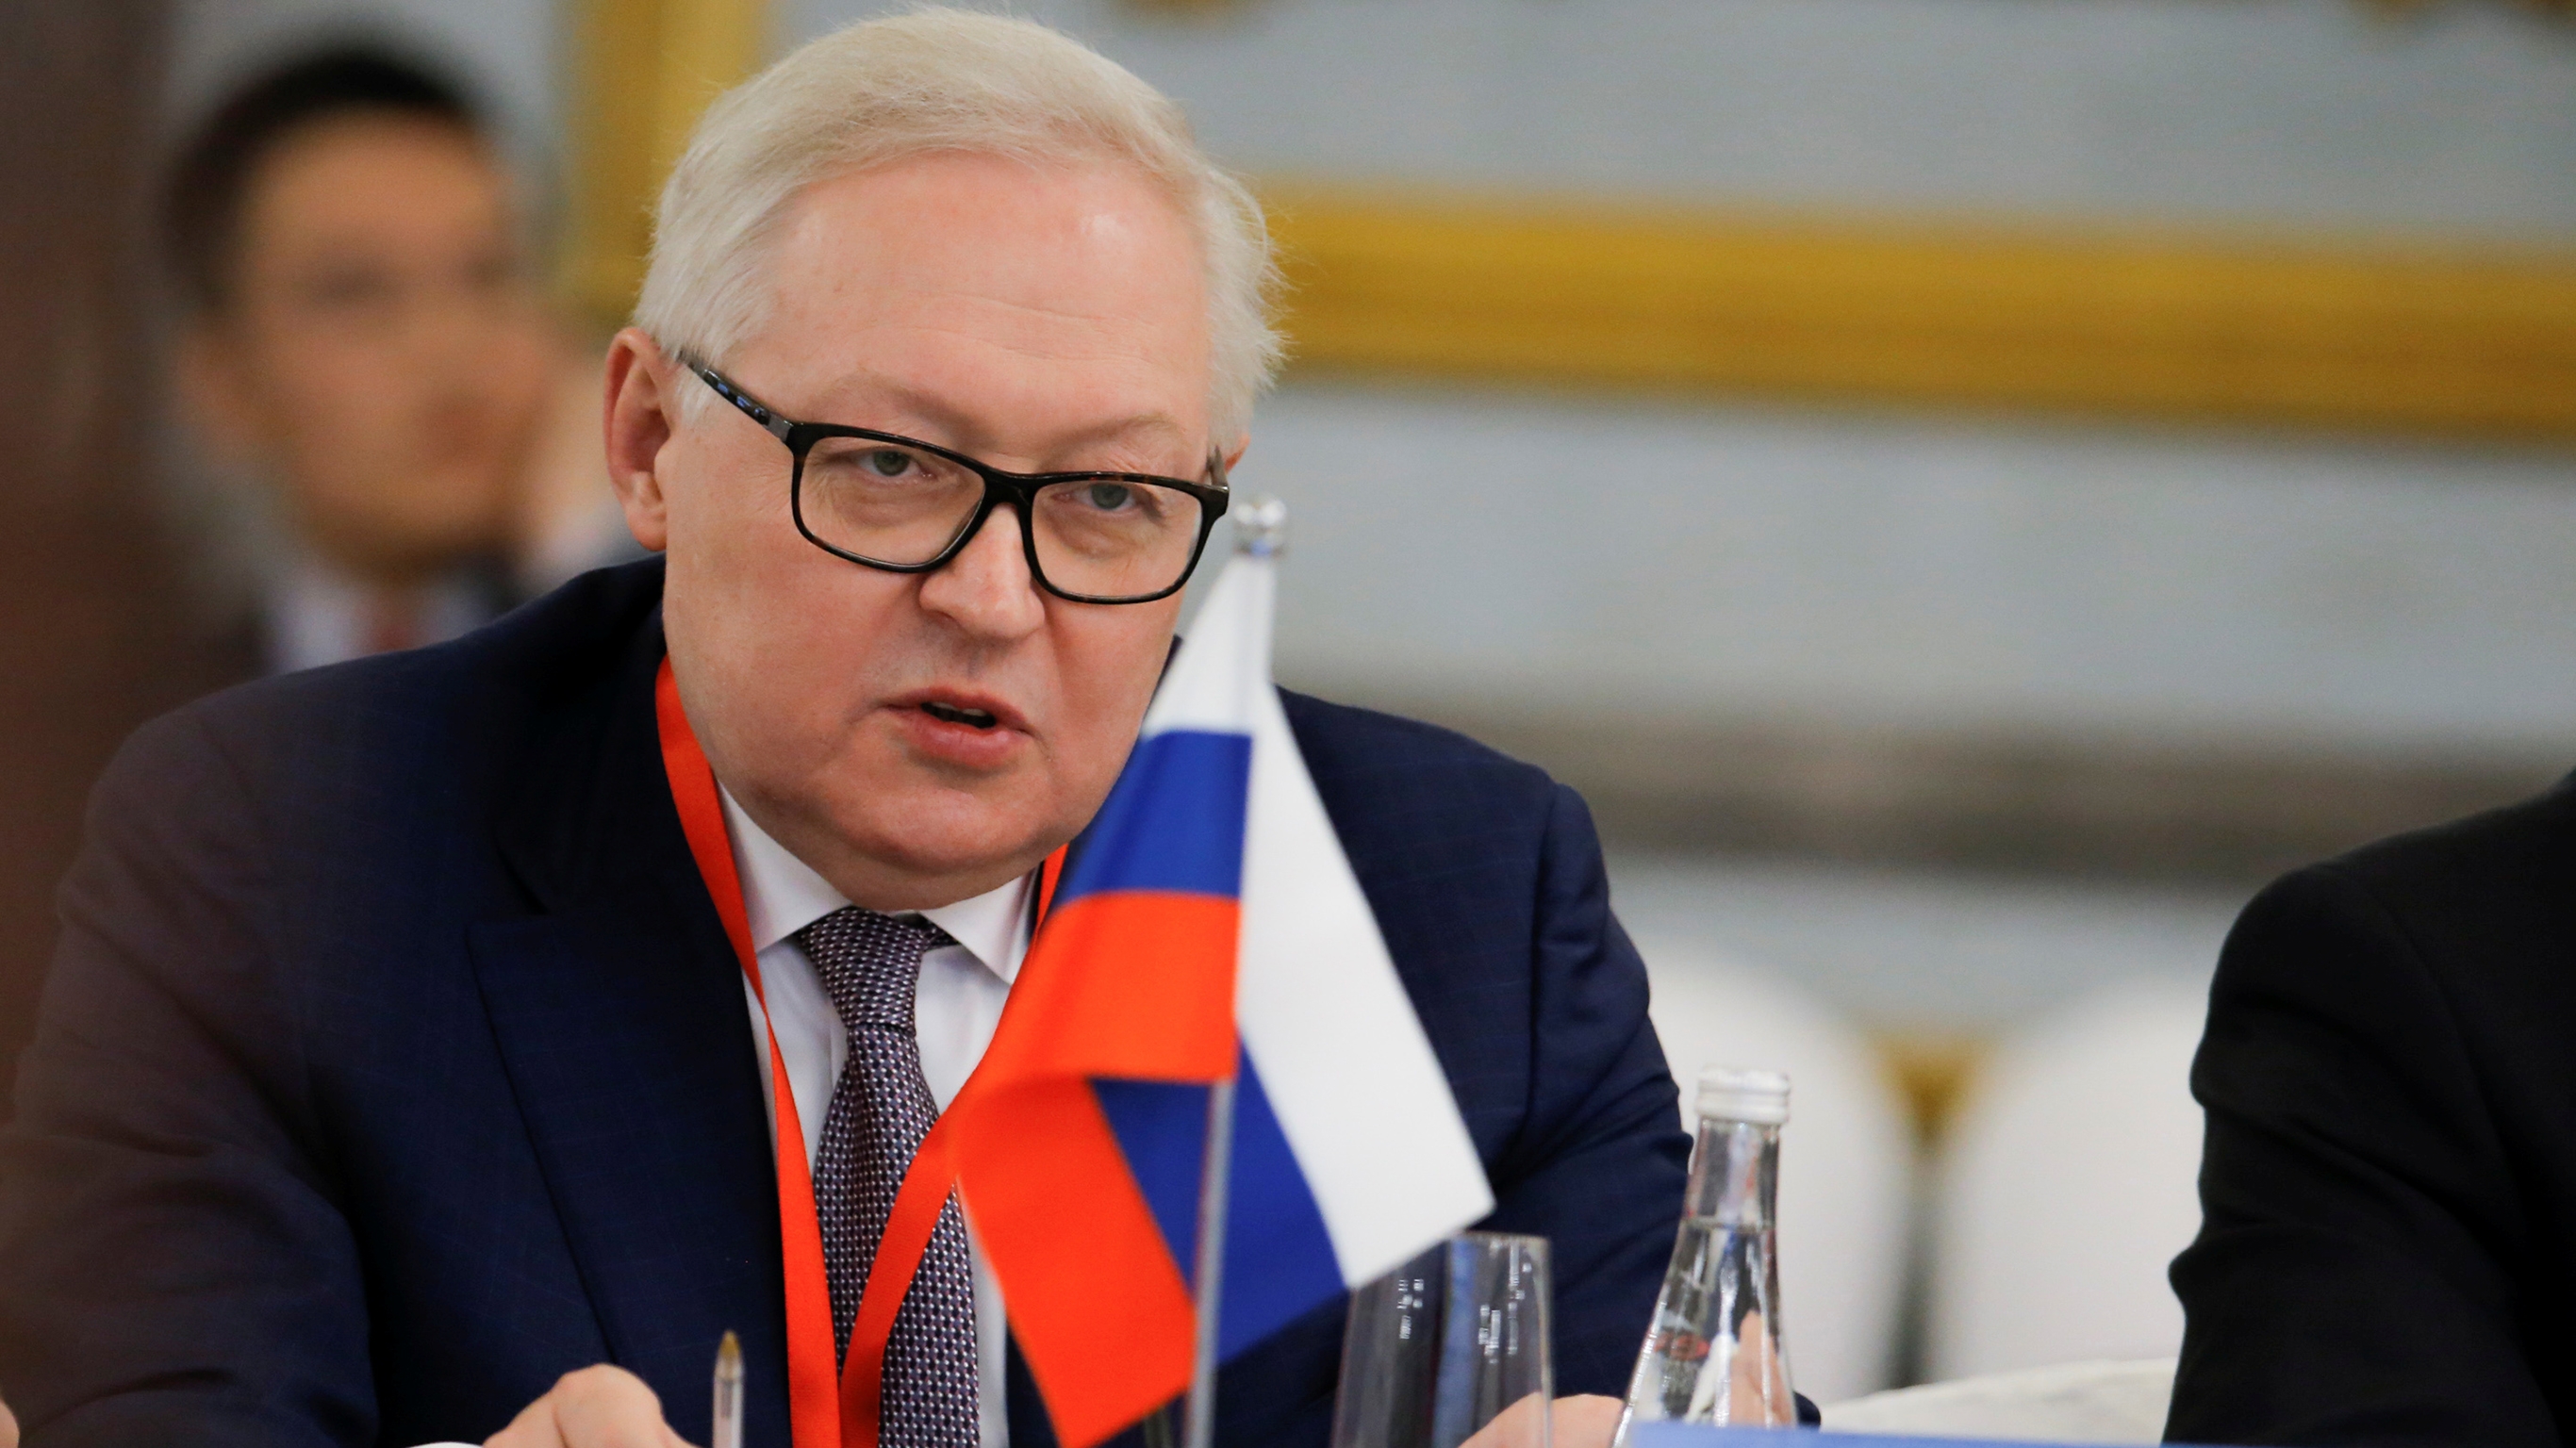 Moscow Will Continue Support for Campaign Against Unilateral Sanctions